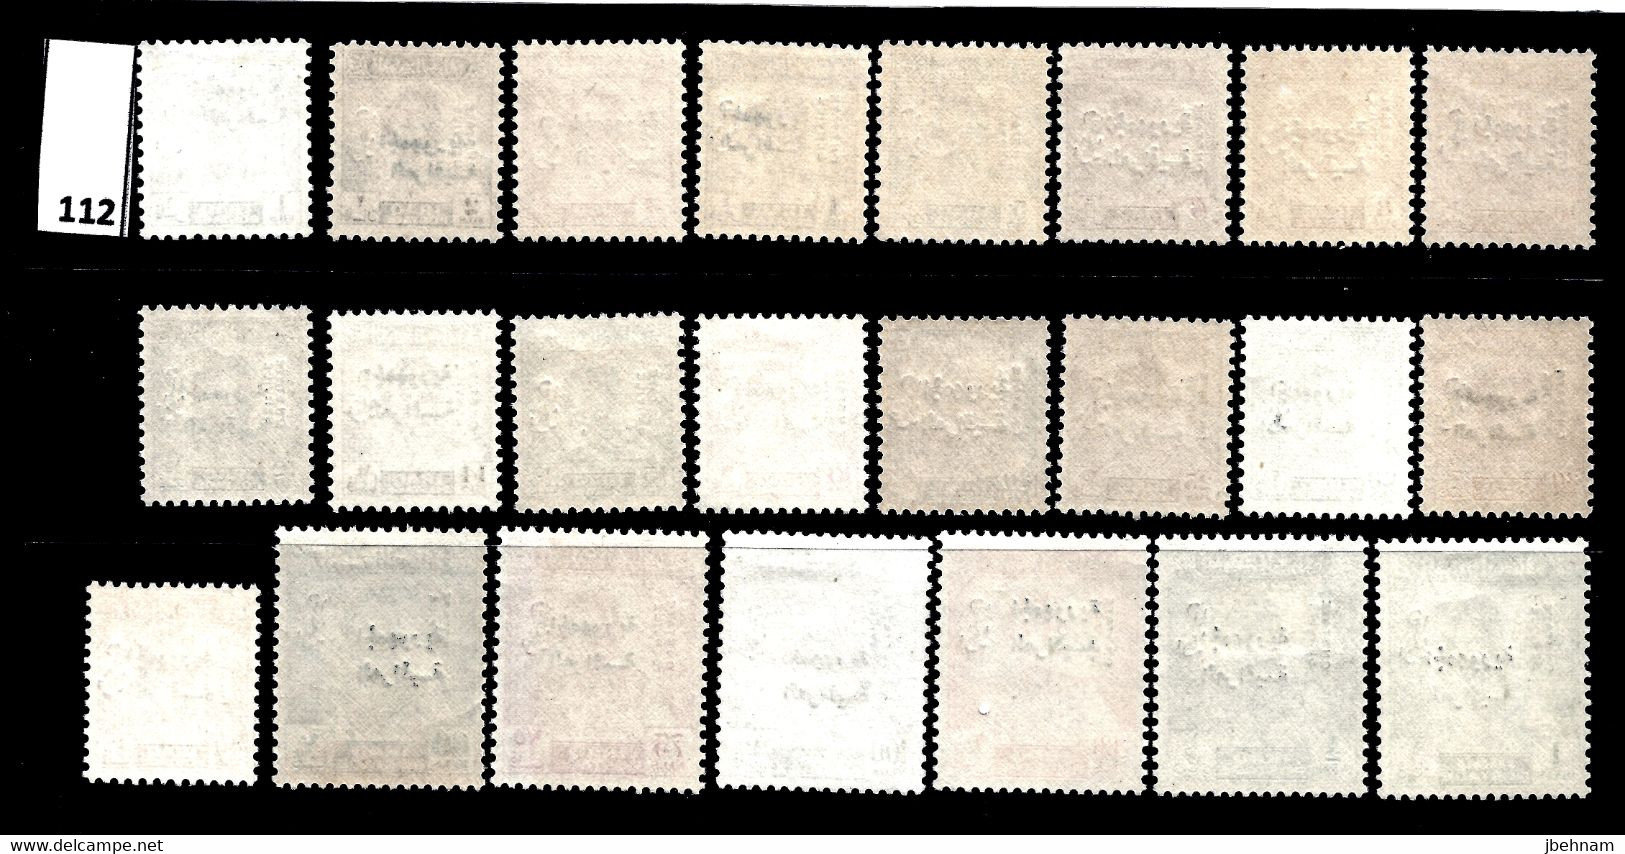 Stamps IRAQ (1958) CV£820 Complete Overprinted Official Set Mint Unhinged - Irak